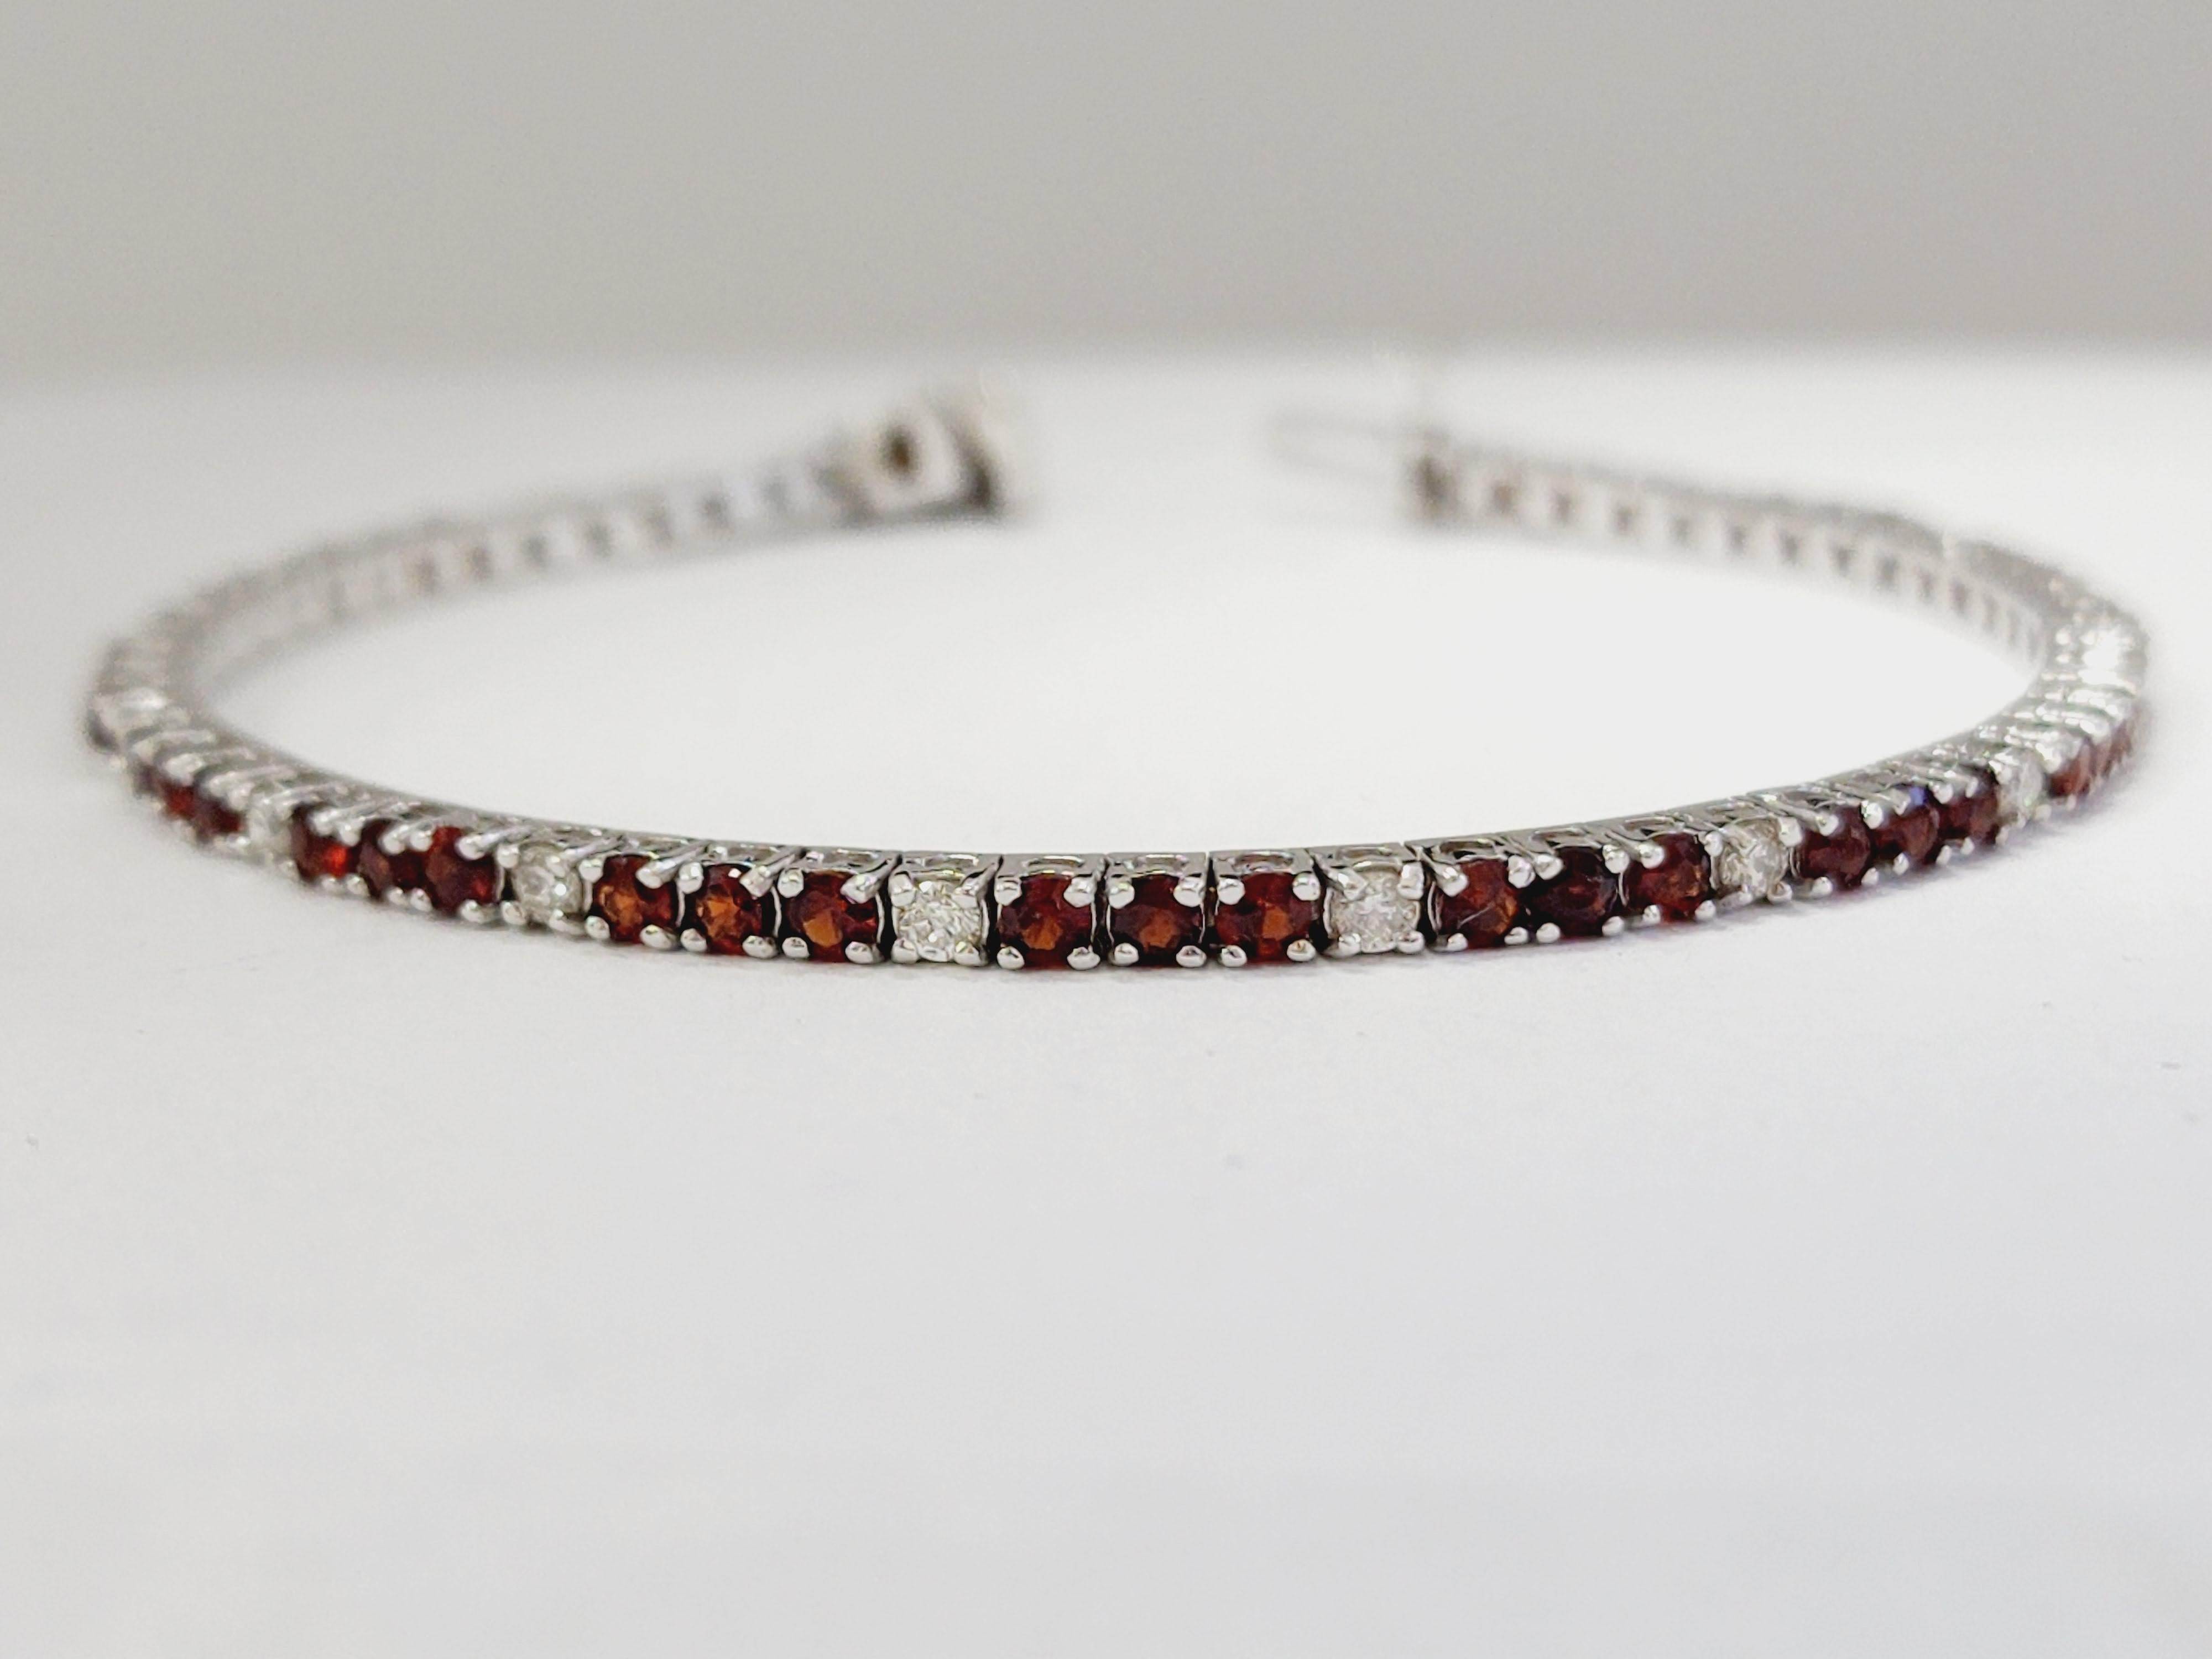 Crafted in white gold 14k, this garnet tennis bracelet is a classic beauty. The 4 prong set round garnets allure with their striking intense red hue. This garnet eternity bracelet secures with a insert clasp.

Garnets 3.30 ct , 
Diamonds 0.70 ct